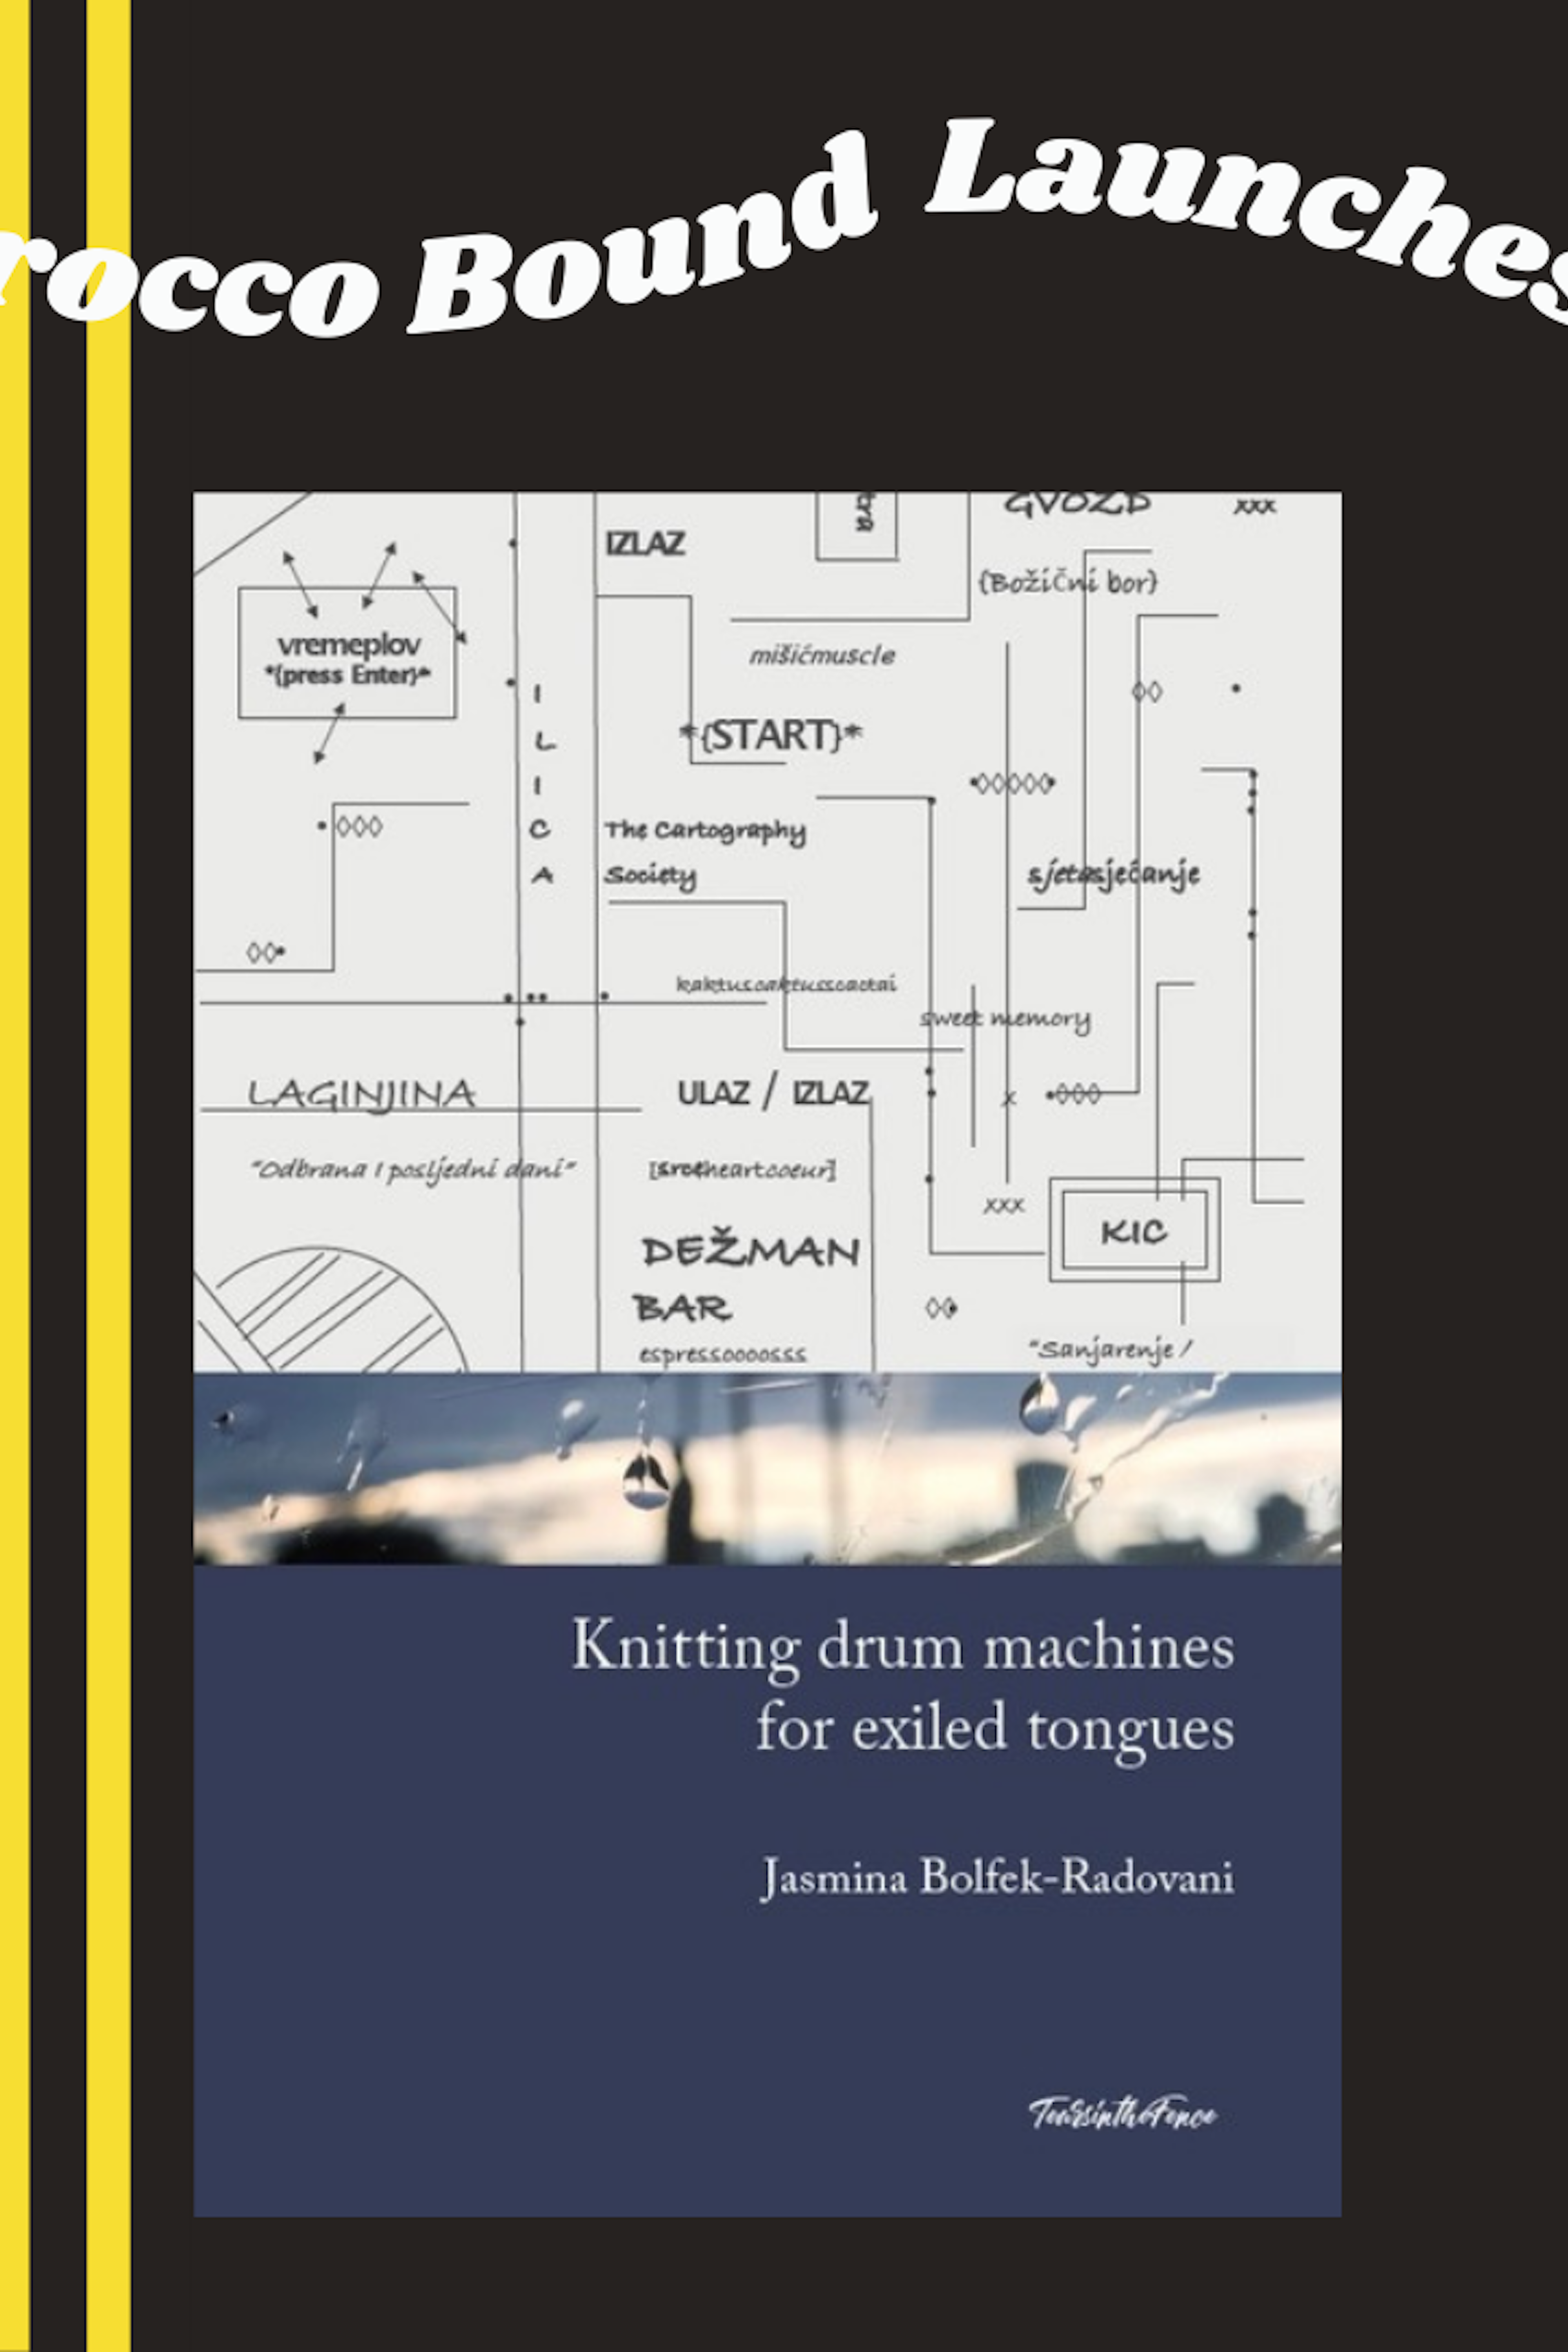 "Knitting drum machines for exiled tongues" book launch, 23 February, Morocco Bound bookshop